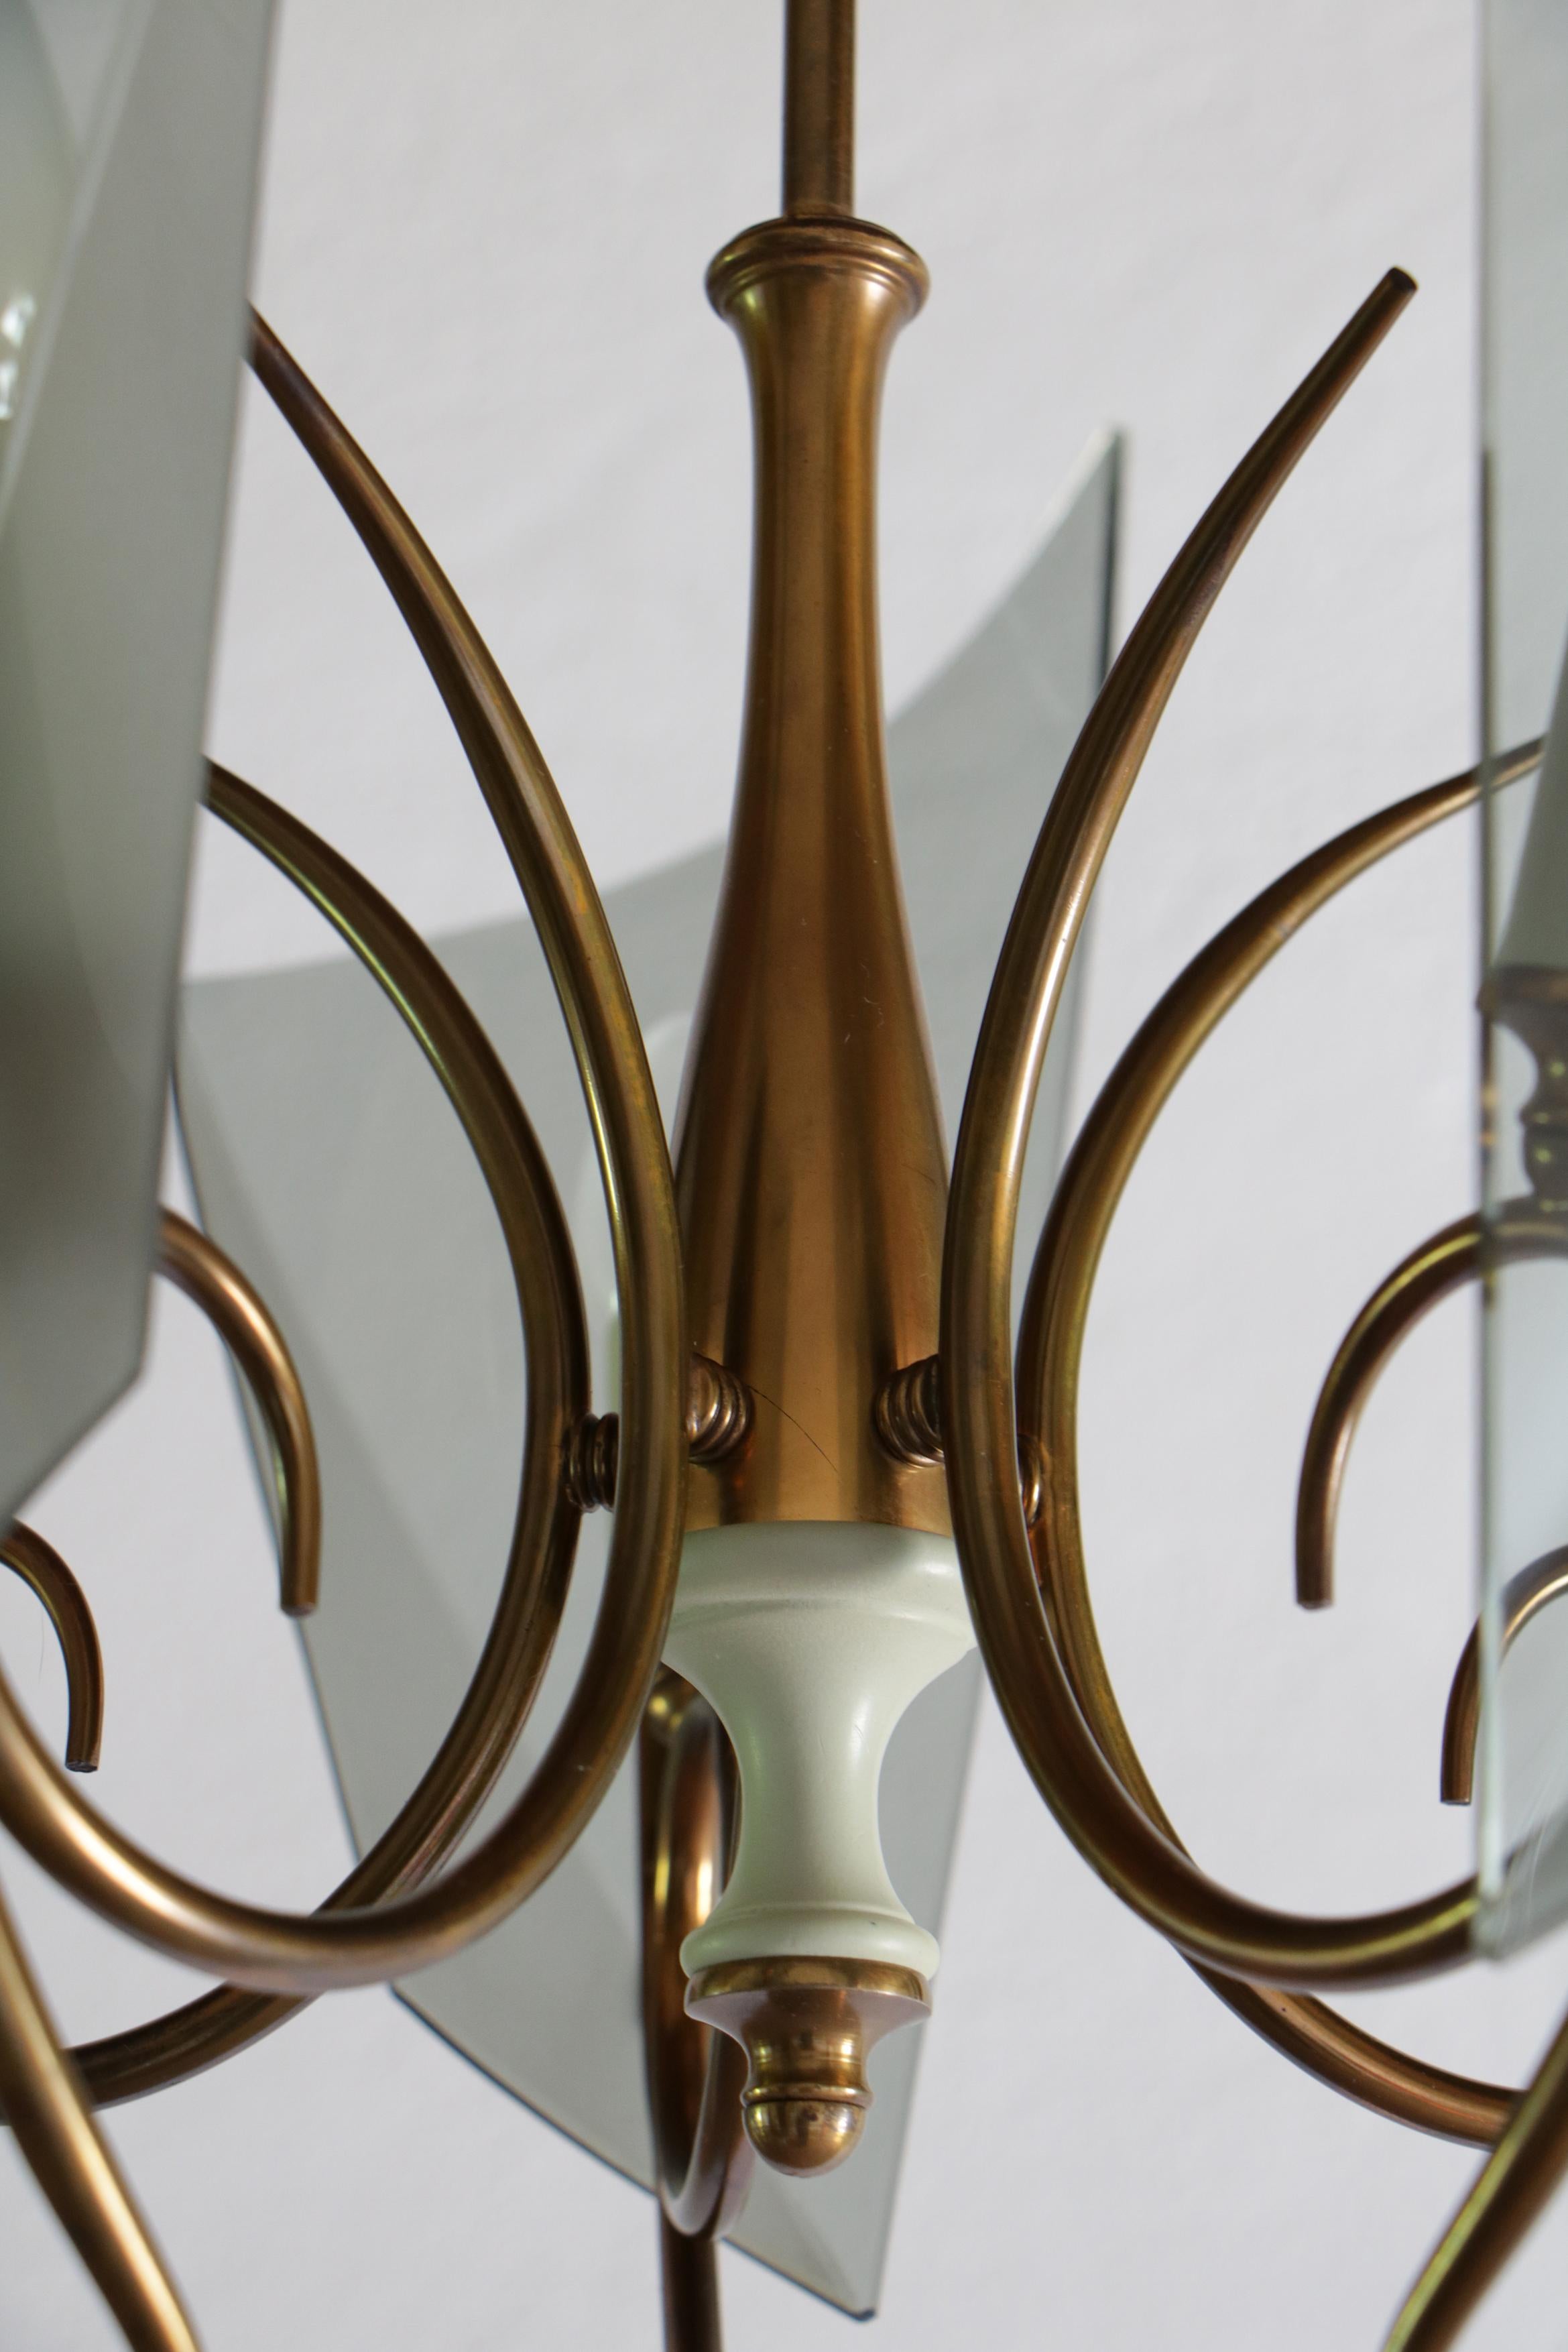 Italian Mid-Century Curved Glass Chandelier Attributed to Fontana Arte, 1950s For Sale 4